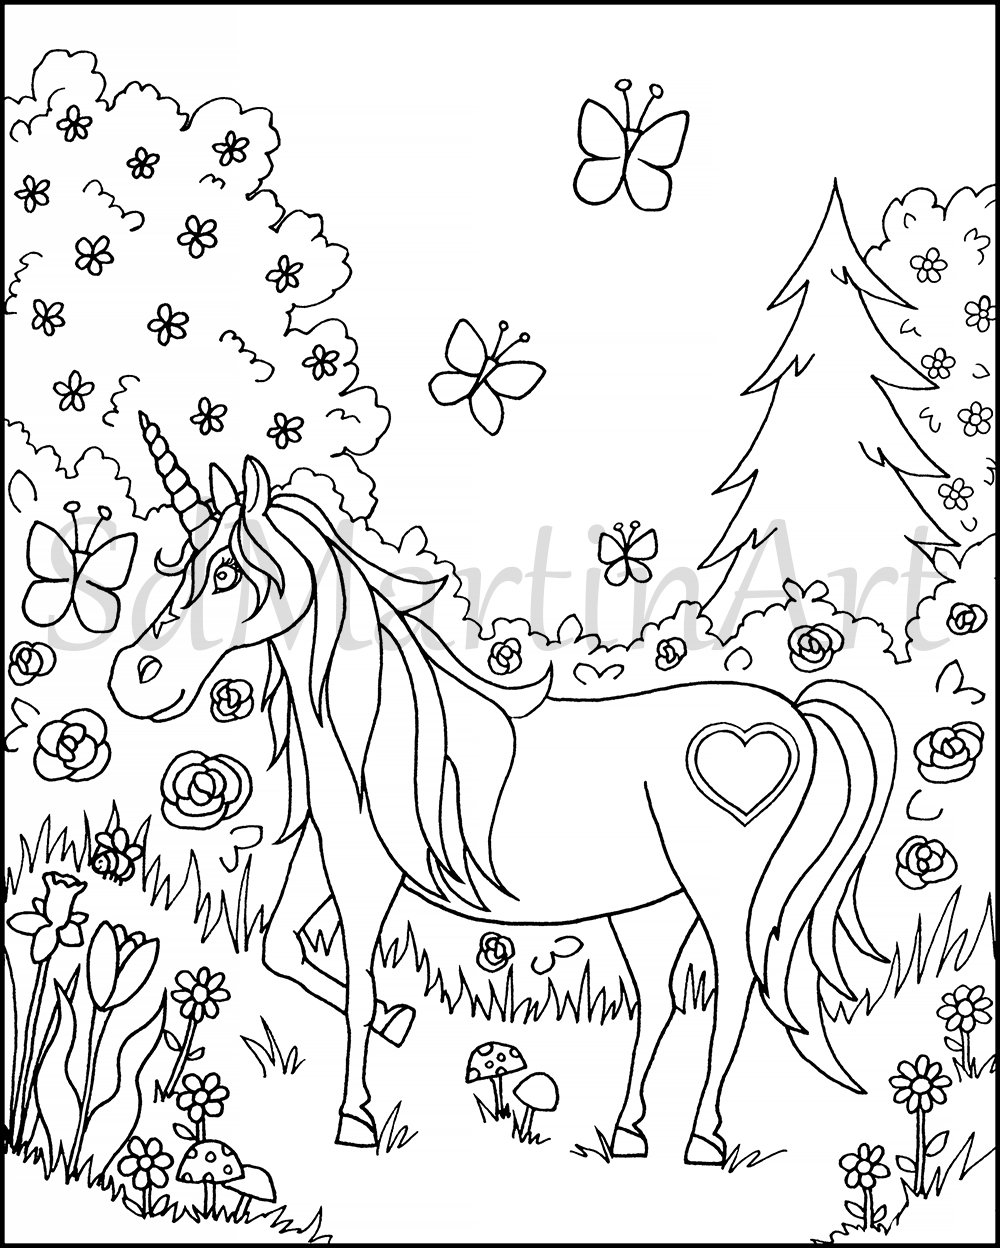 Unicorn and Butterflies-Printable Adult Coloring Book Page-For | Etsy